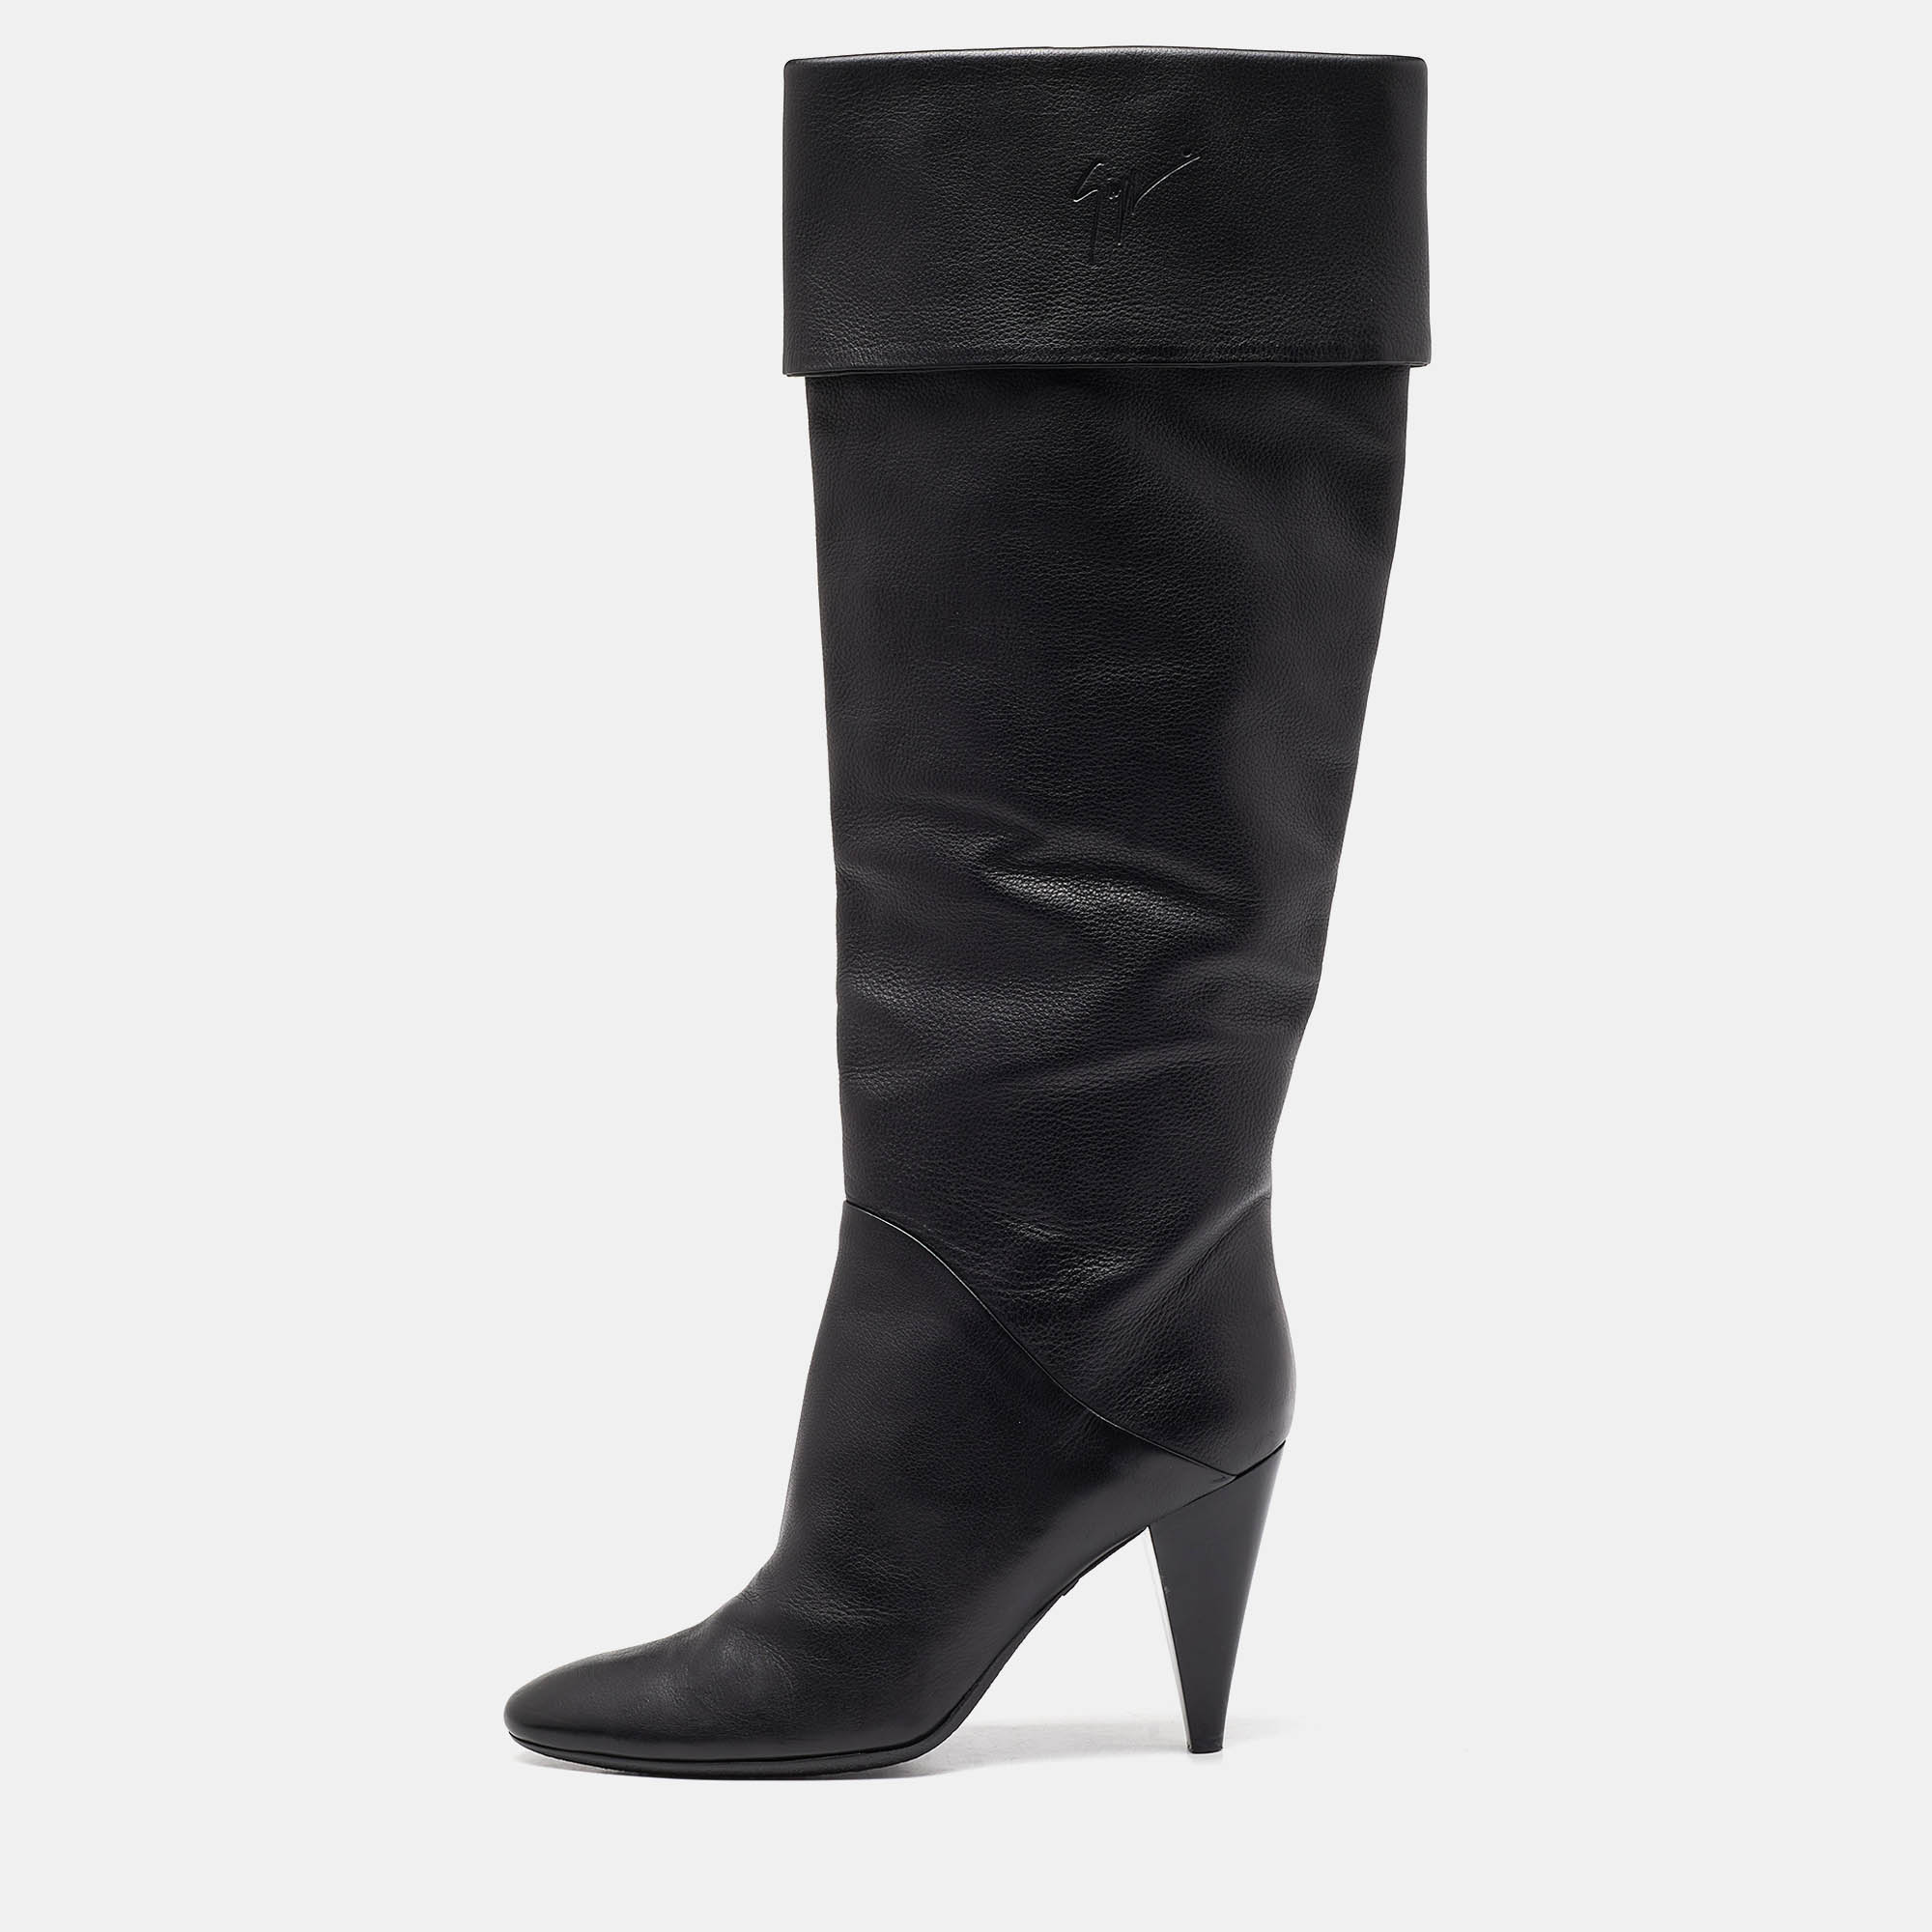 Black Leather Knee Length Boots